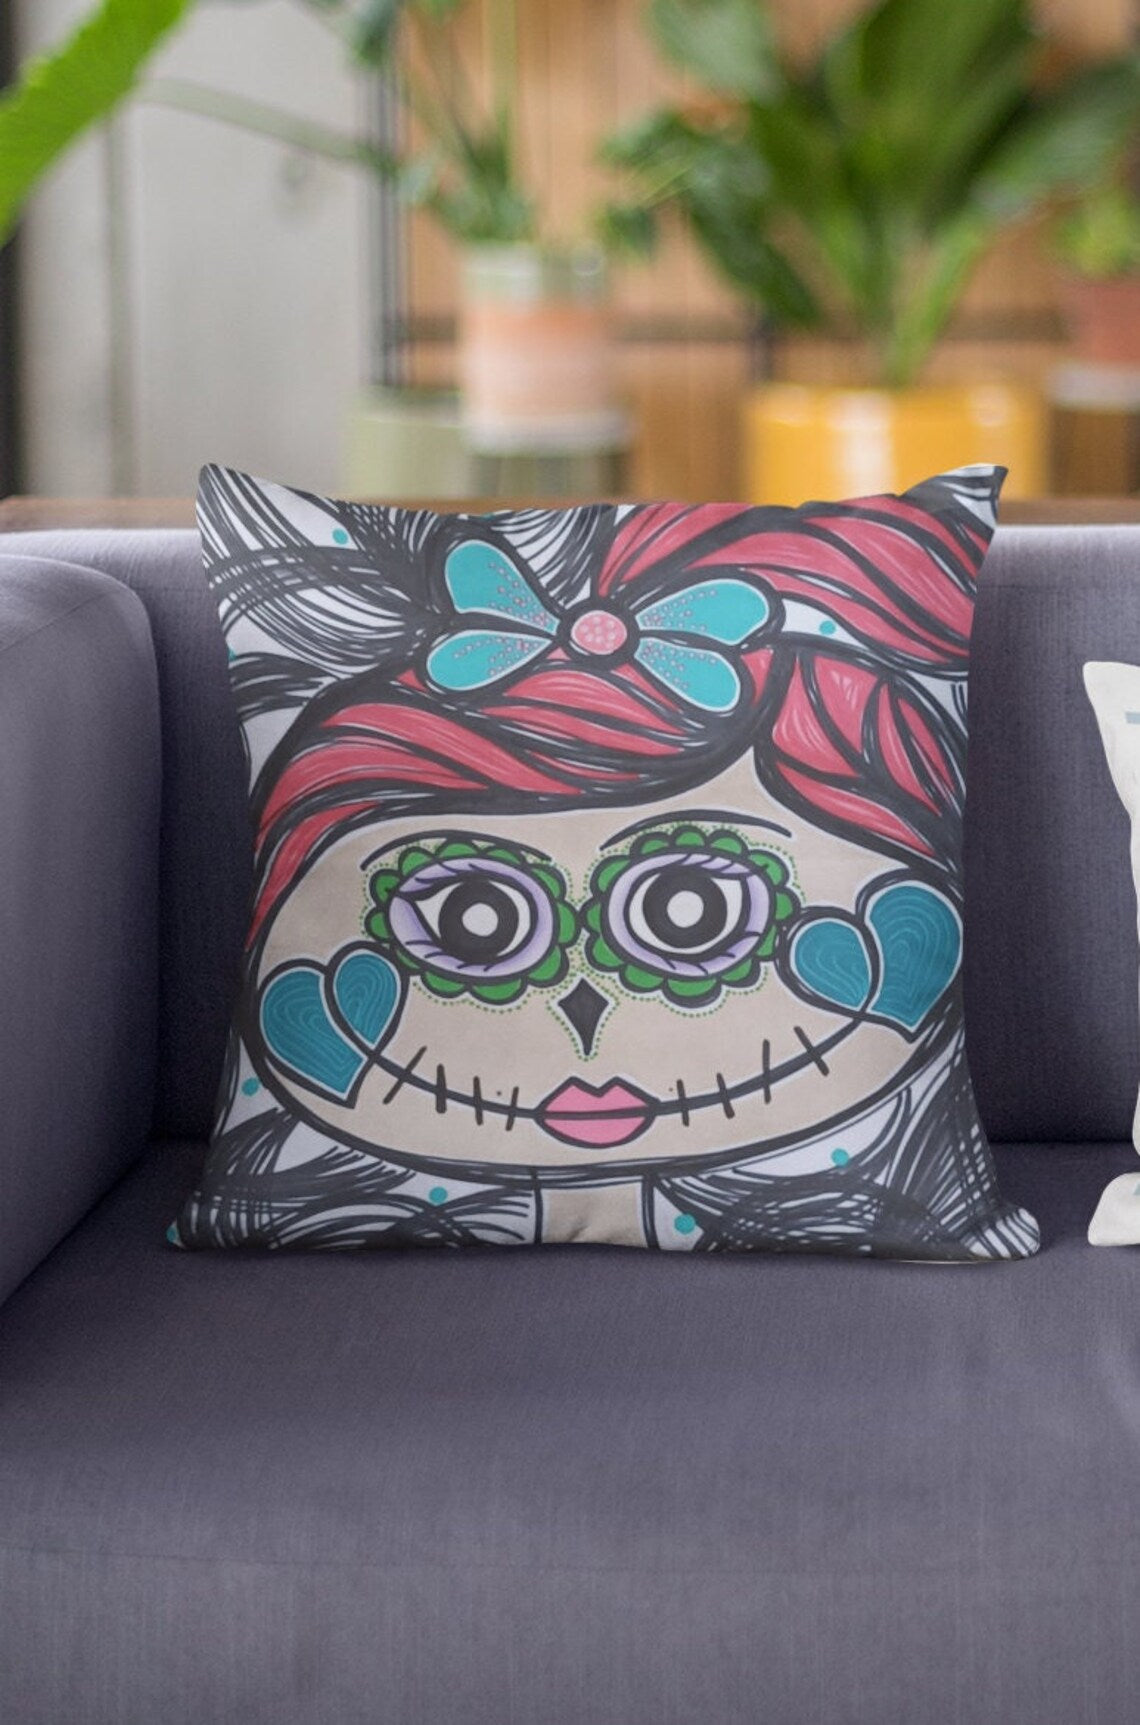 Square Pillowcase Catrina Handmade Painted Crafted Cotton Canvas Gifts Home Decor